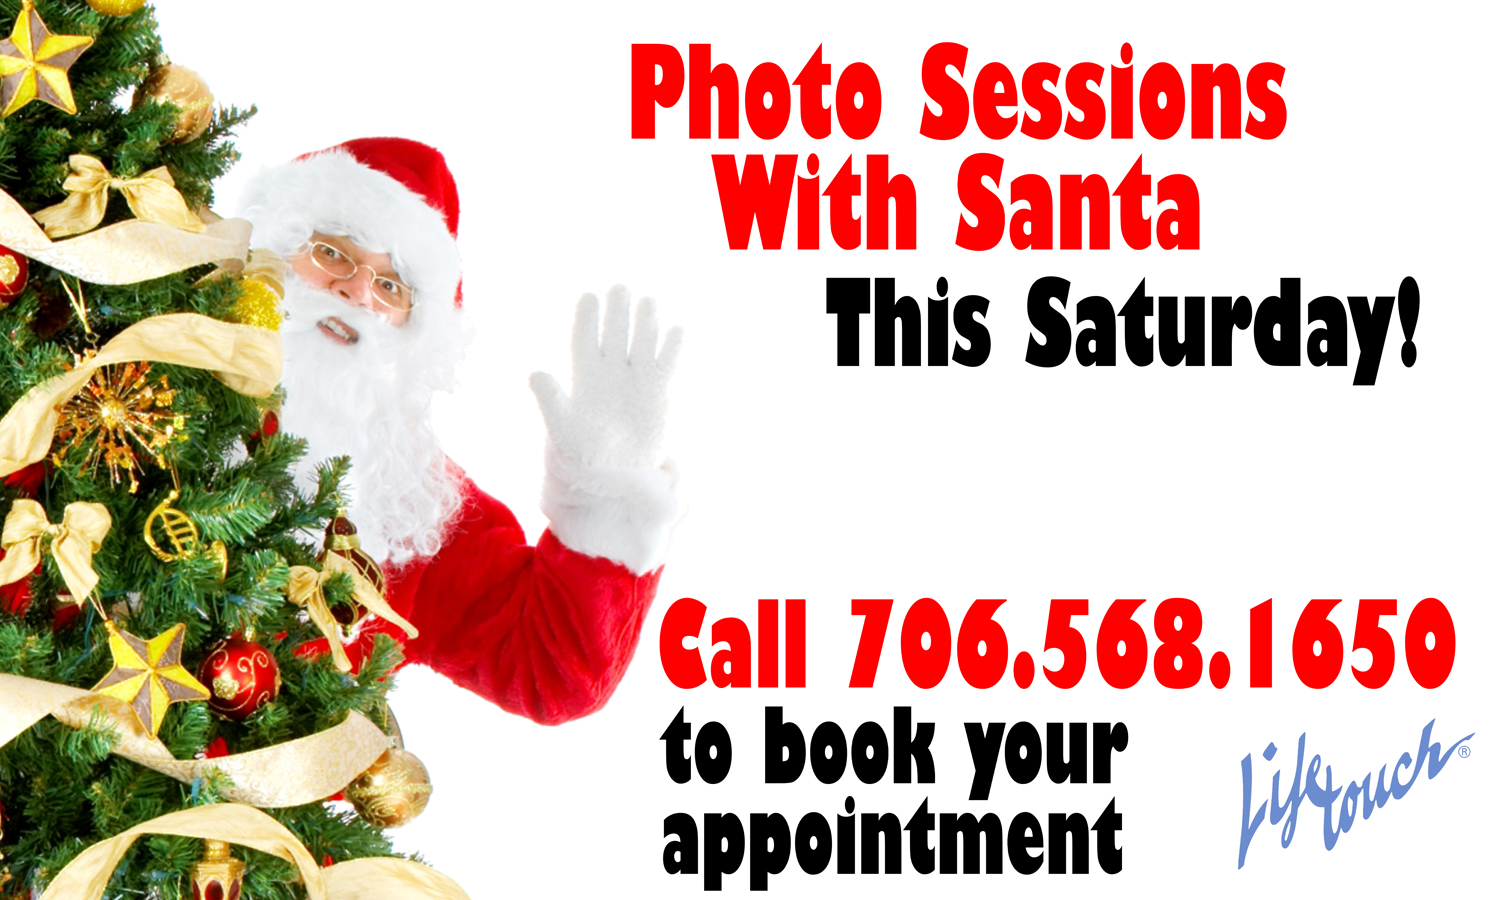 Pictures With Santa by Lifetouch Photography